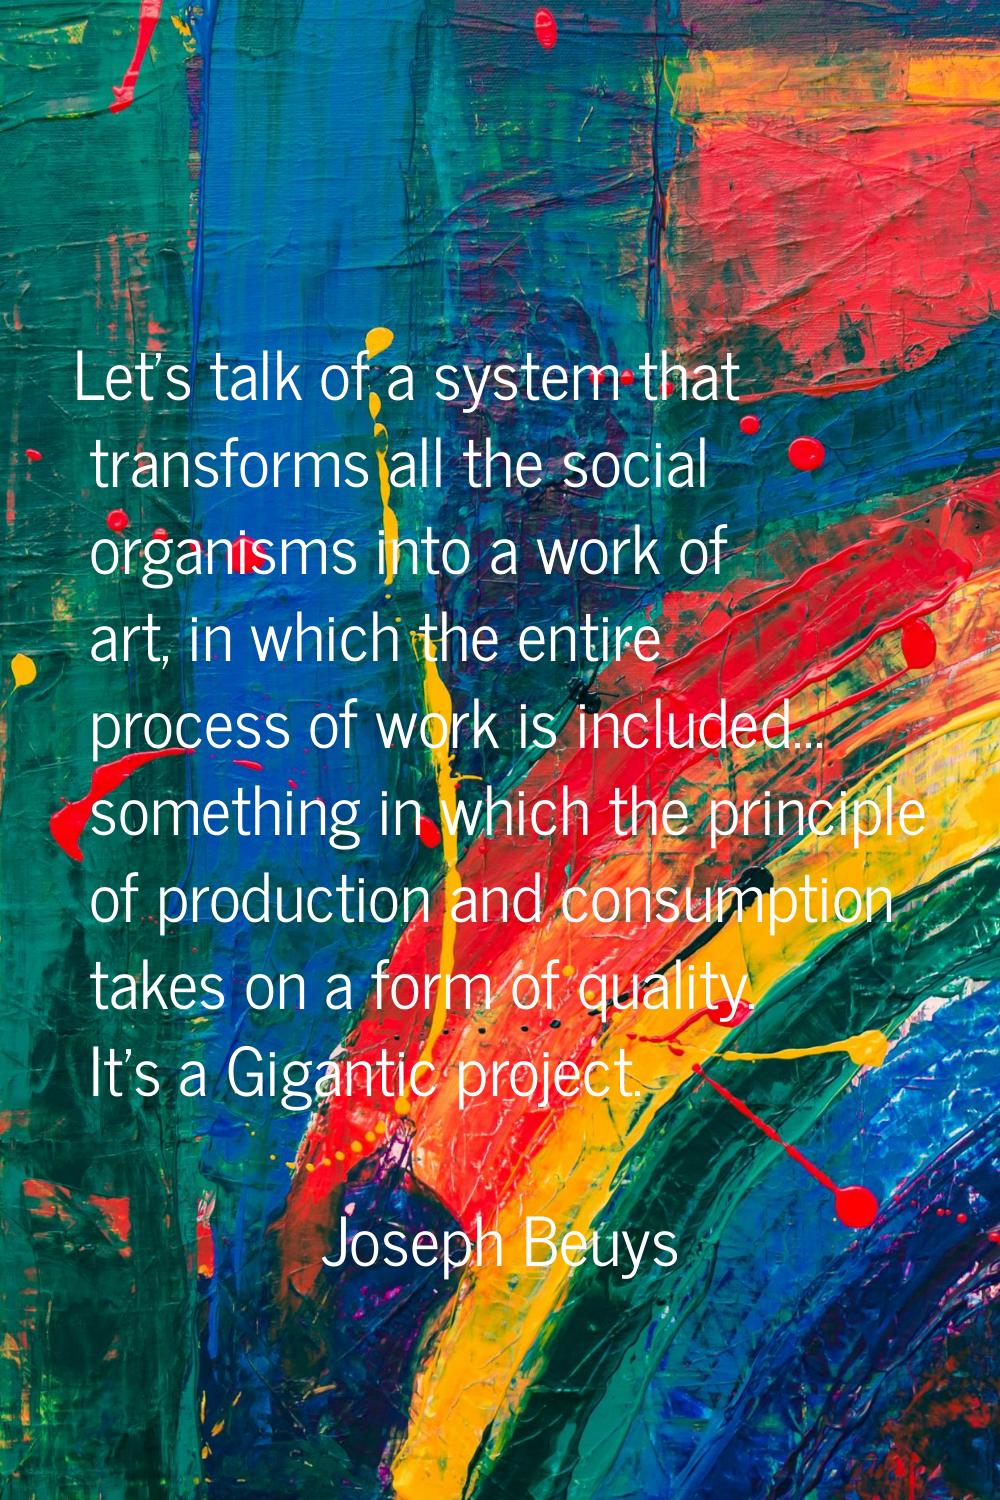 Let's talk of a system that transforms all the social organisms into a work of art, in which the en